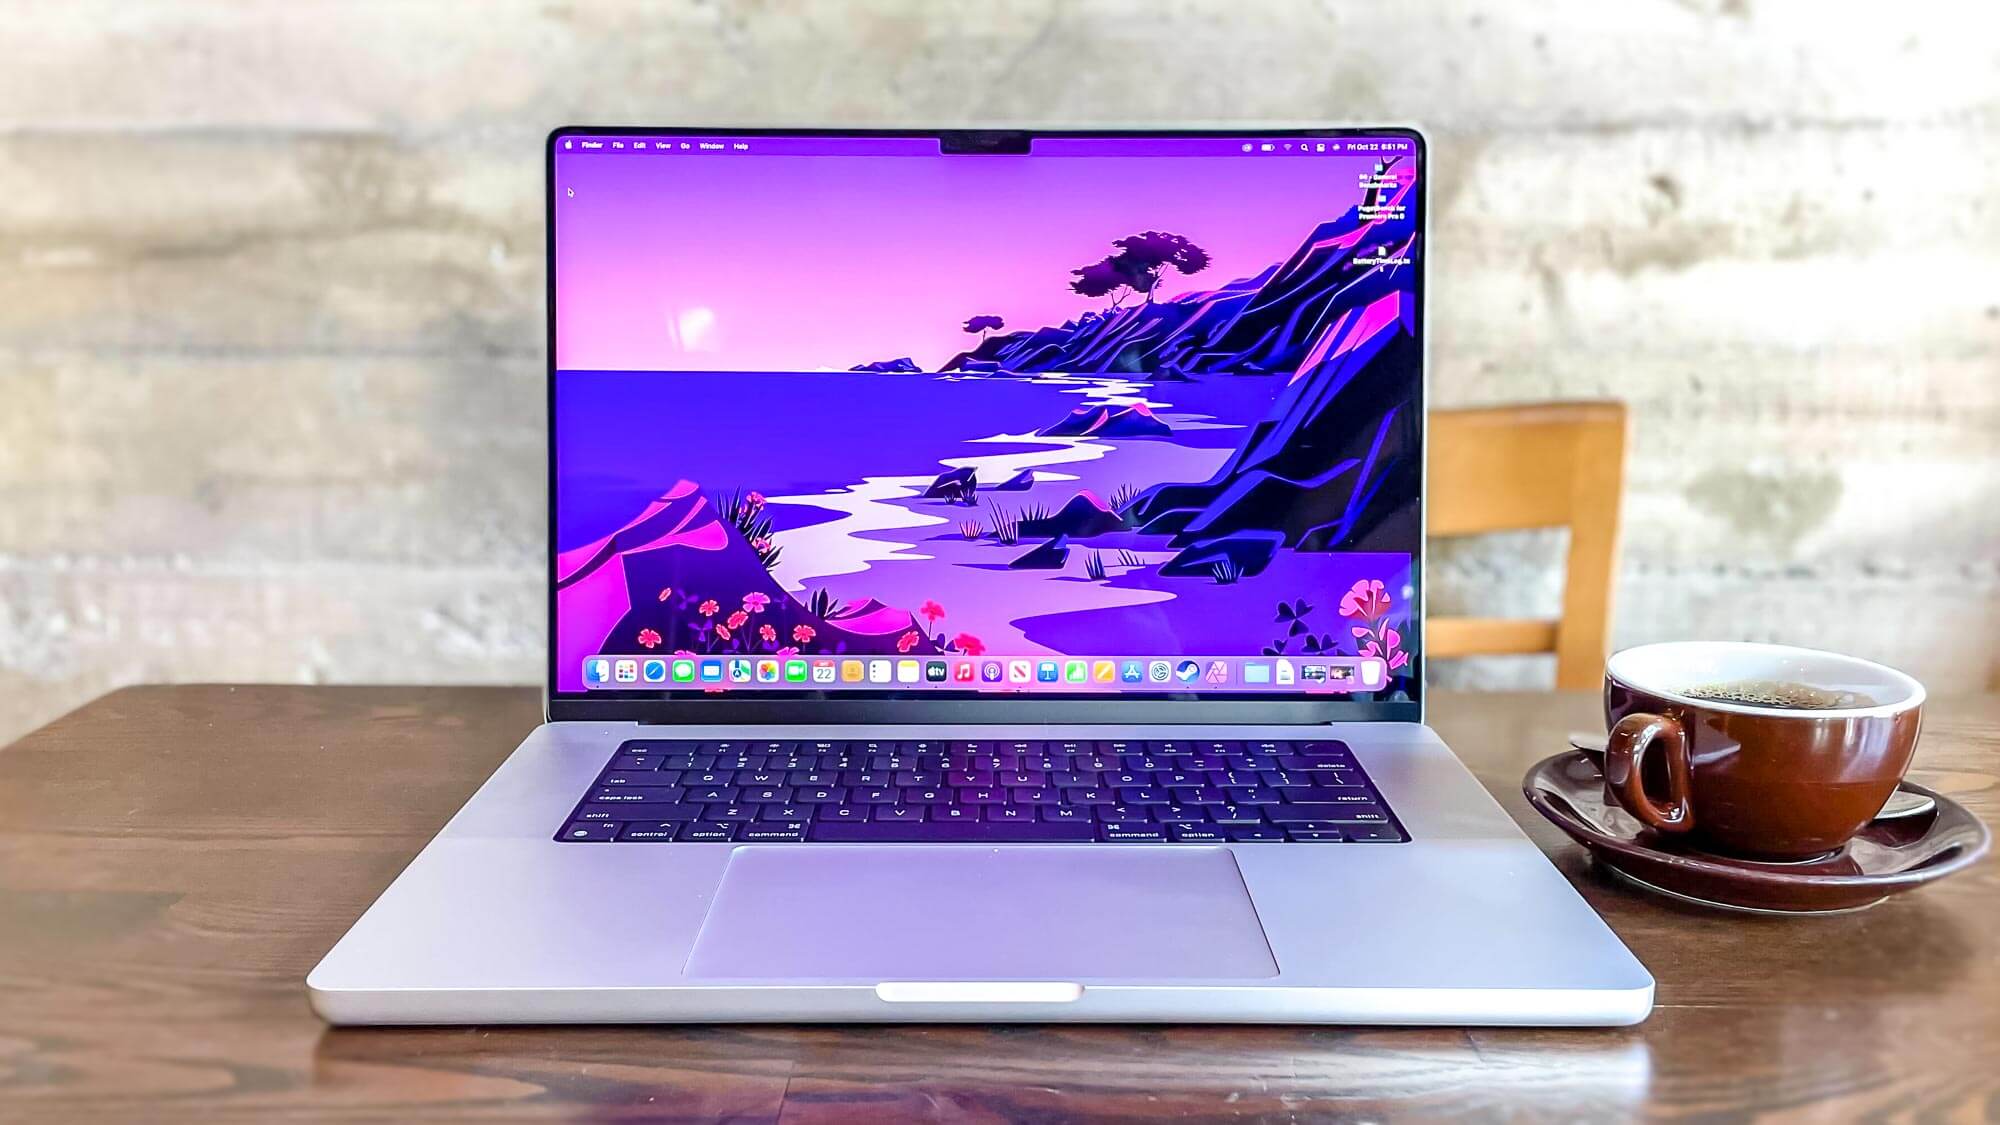 Best MacBook for Business Home and Office Work The maciOS